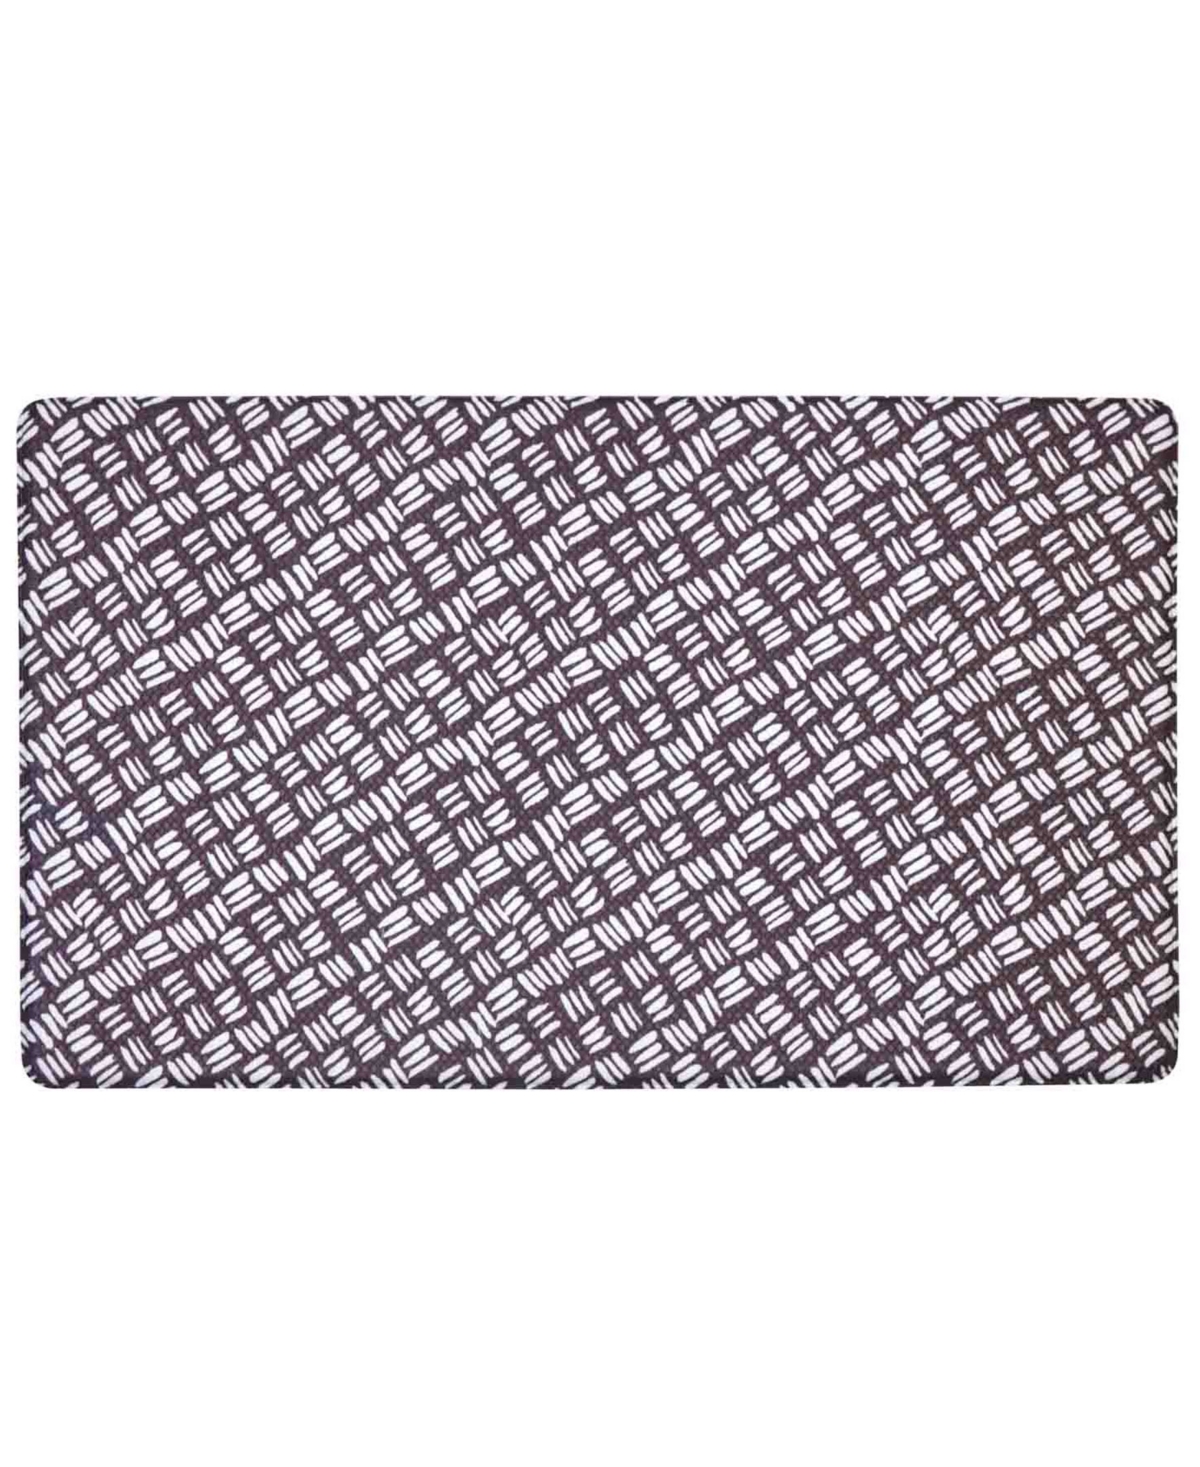 Tommy Bahama Printed Polyvinyl Chloride Fatigue-resistant Mat, 18" X 30" In White Black Basket Weave